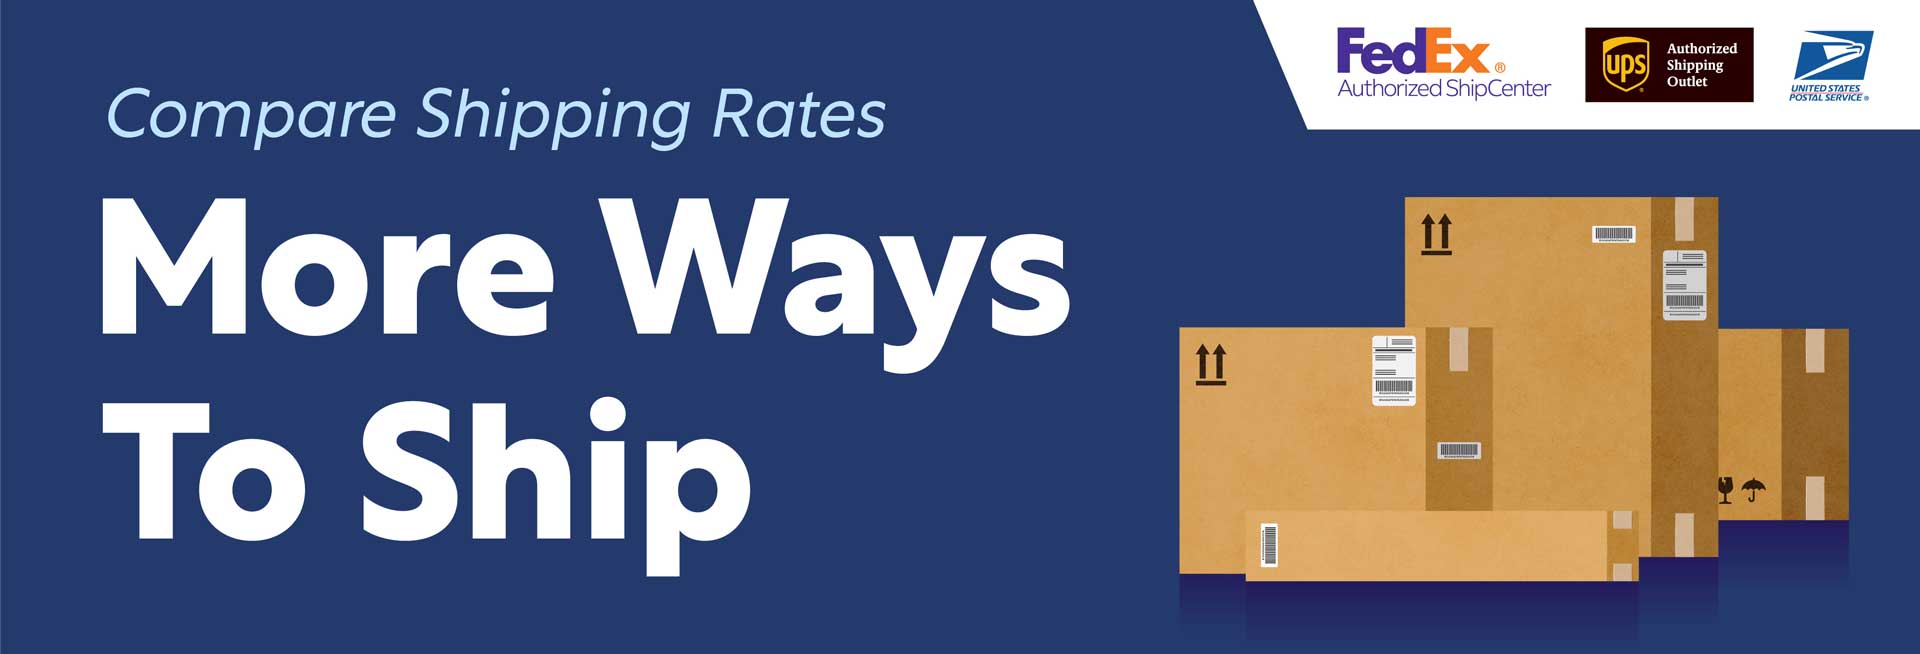 Compare Shipping Rates - More Ways to Ship